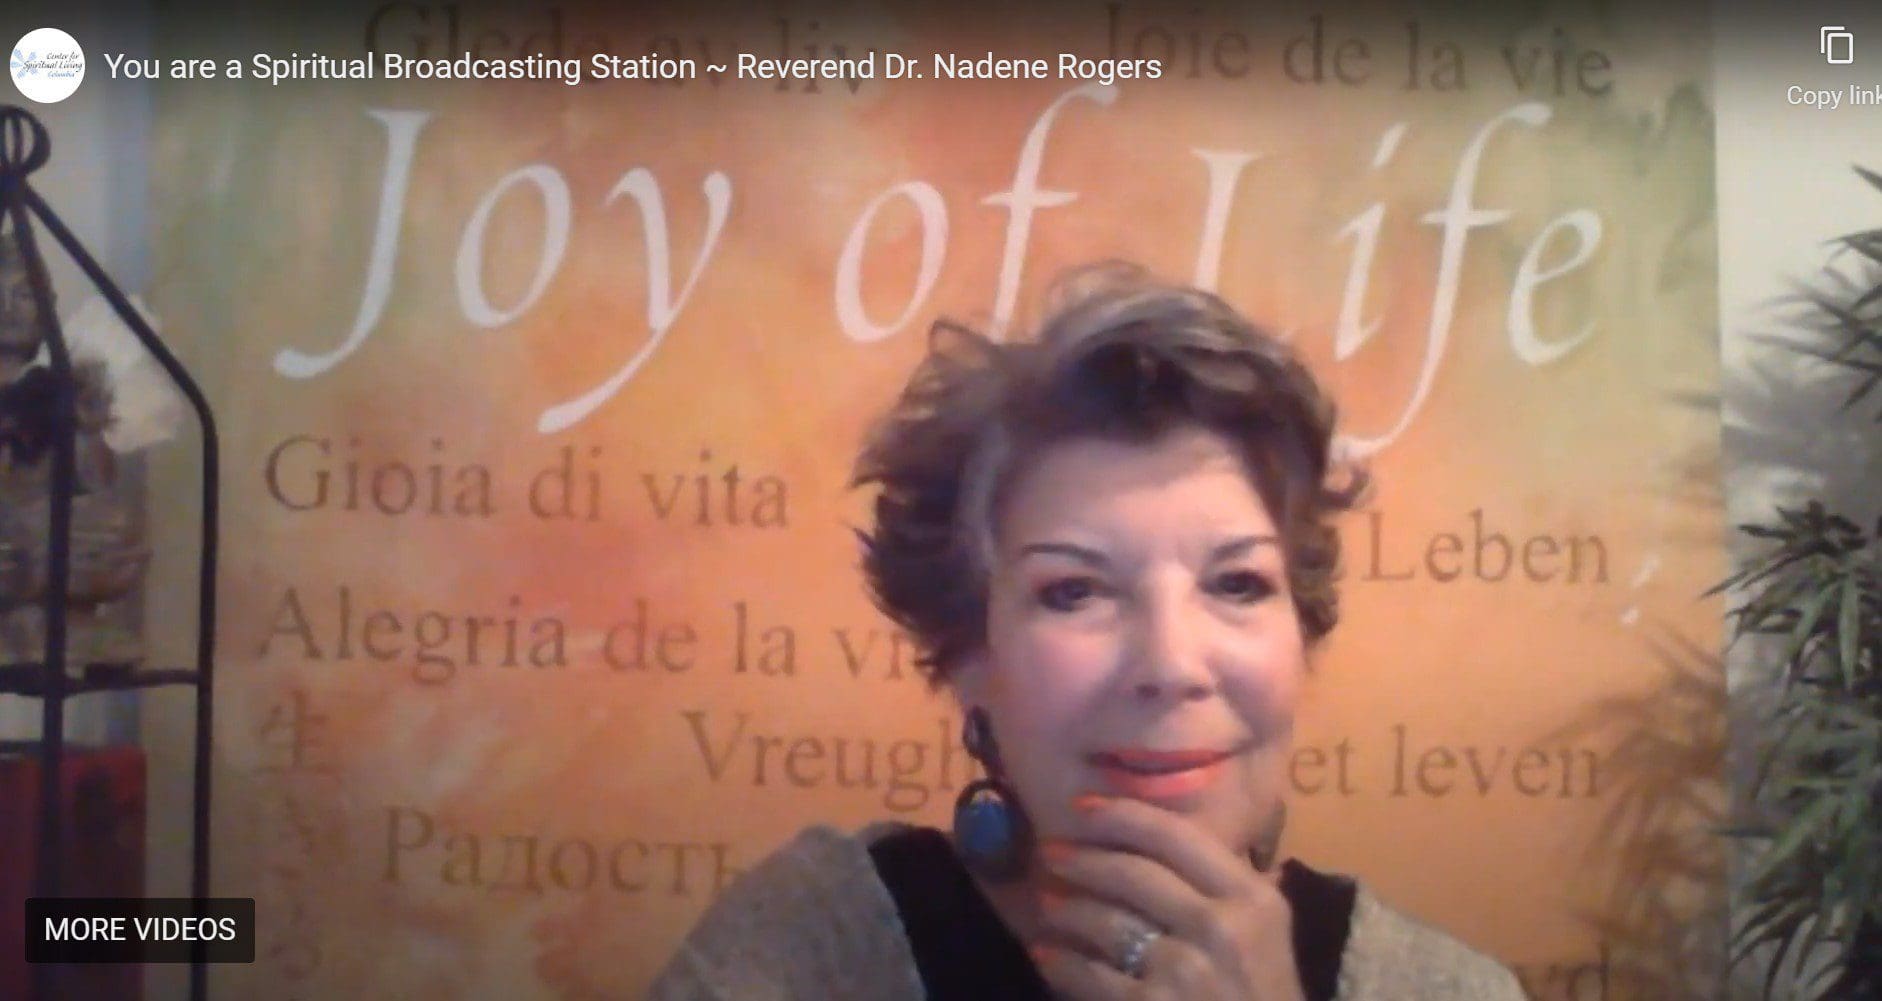 “You are a Spiritual Broadcasting Station!” – Rev. Dr. Nadene Rogers